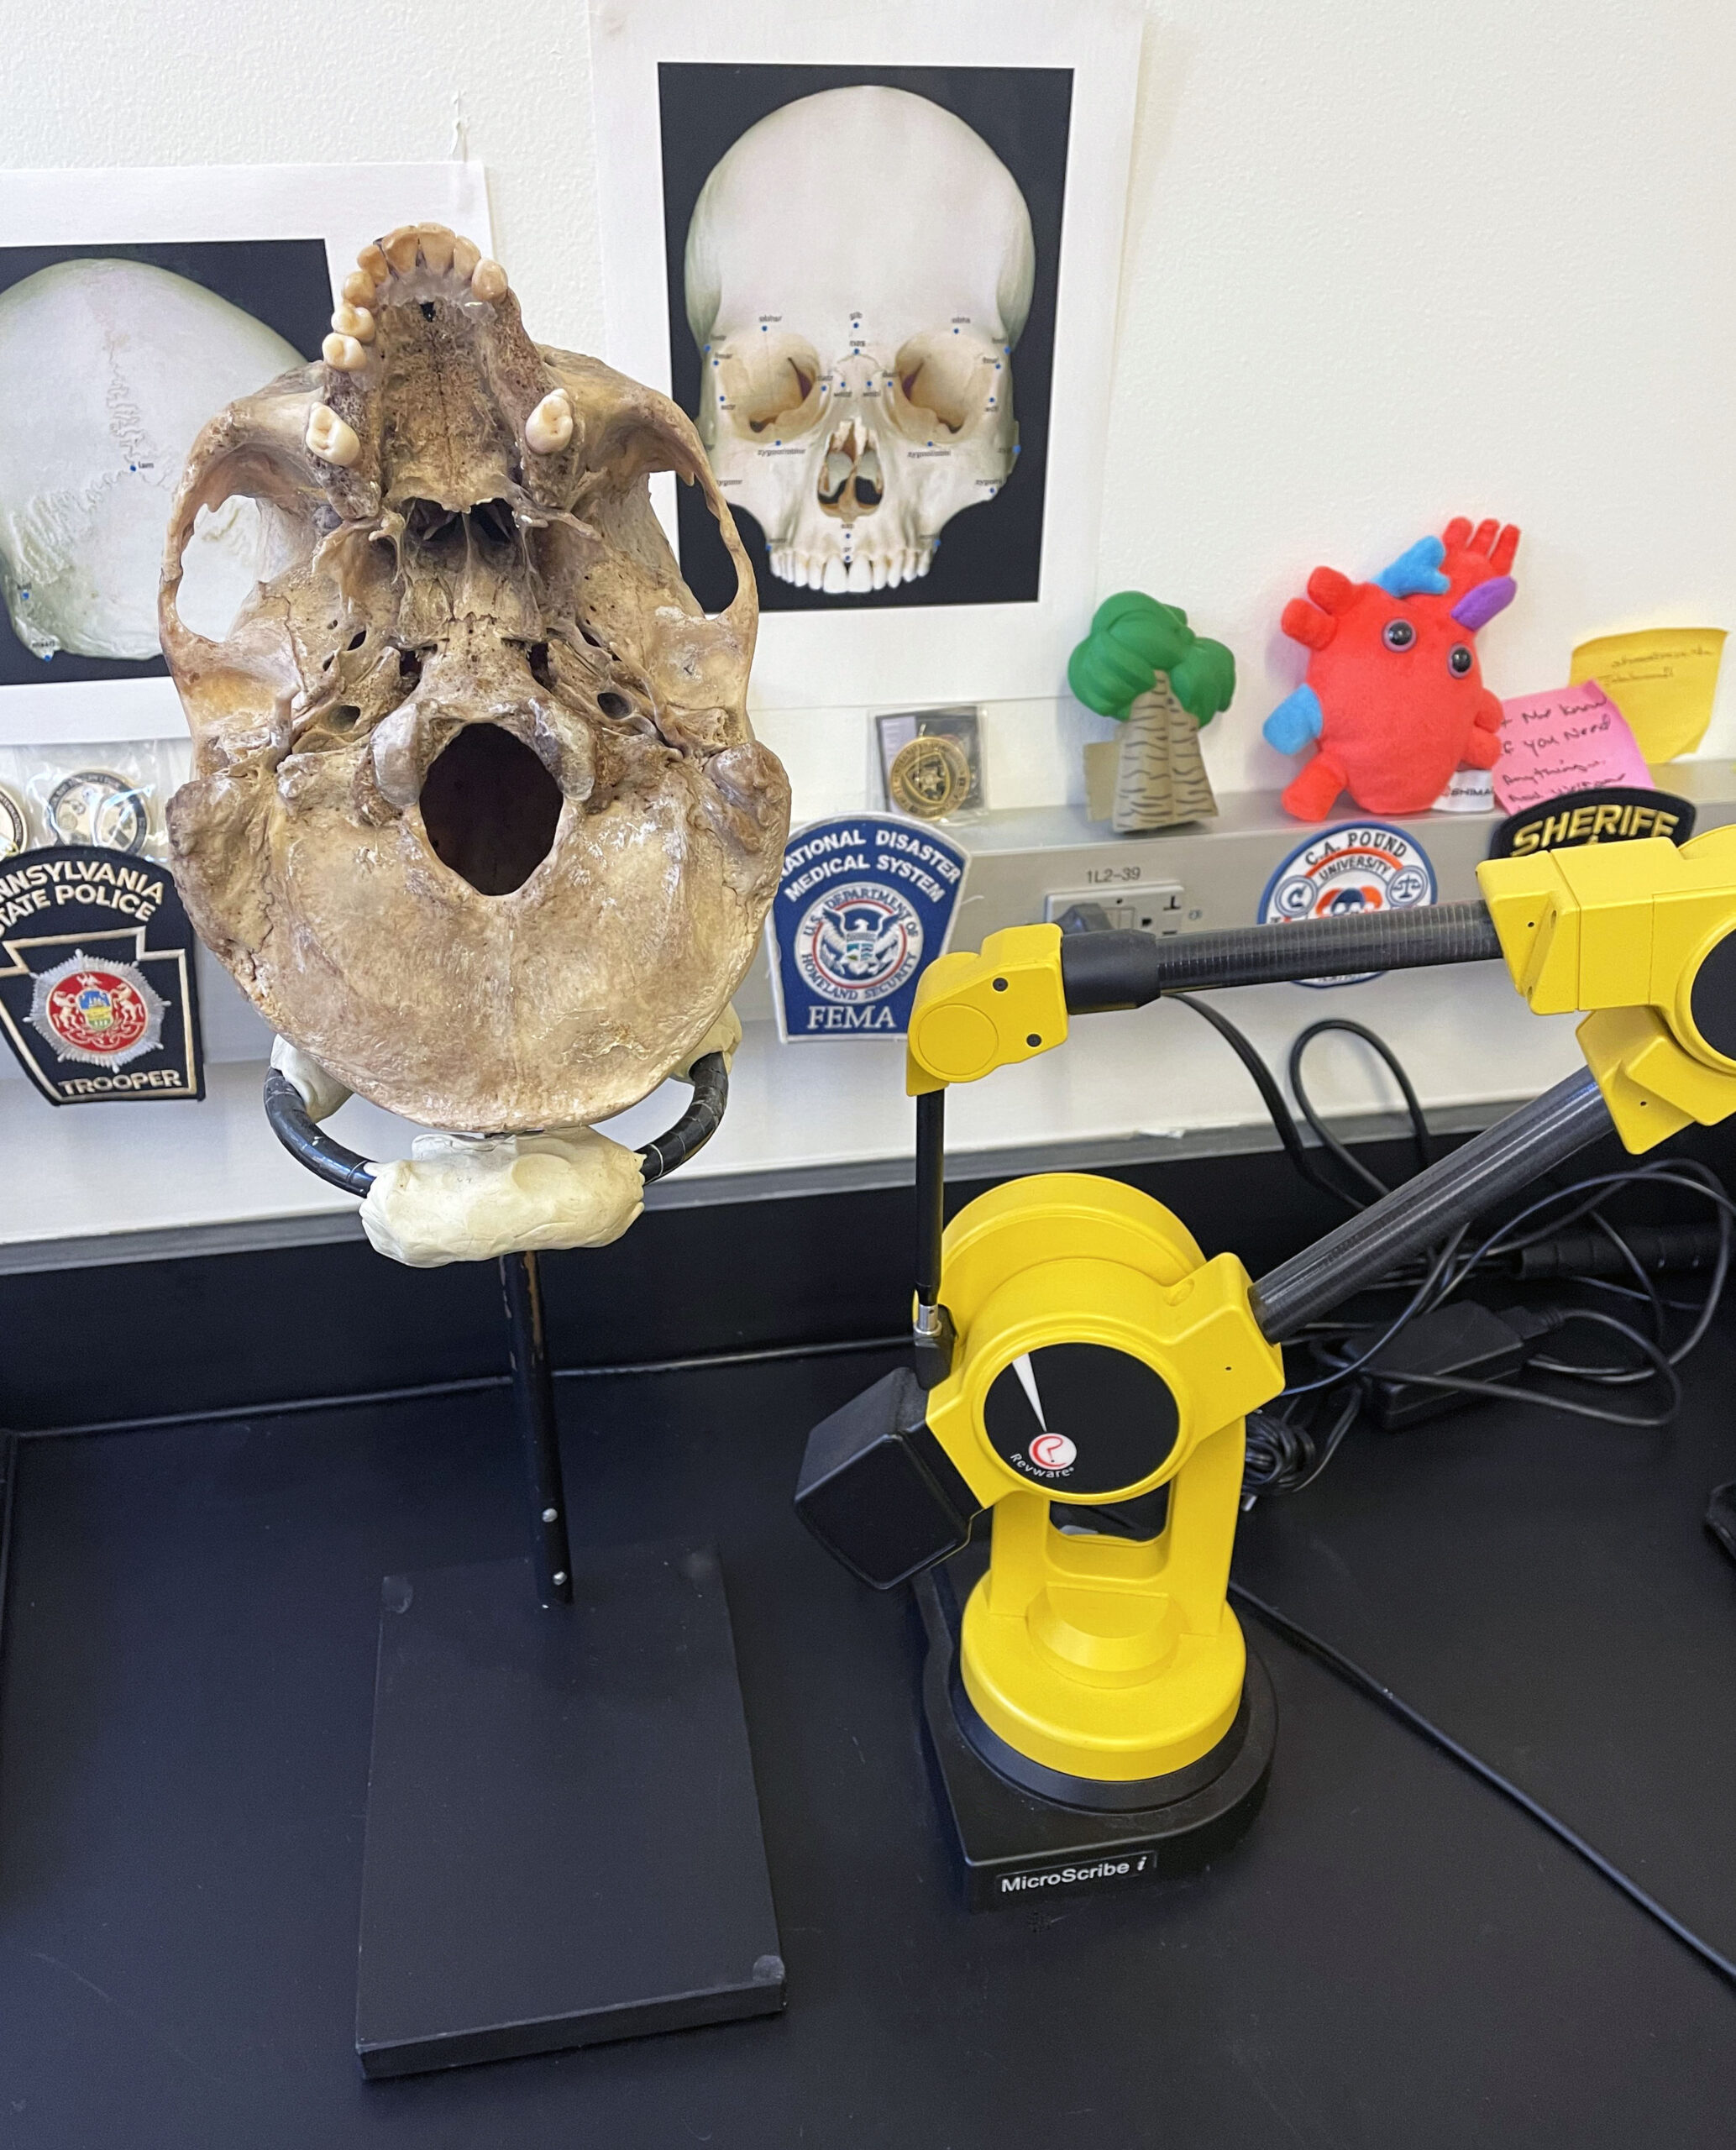 Skull on stand with MicroScribe Portable CMM